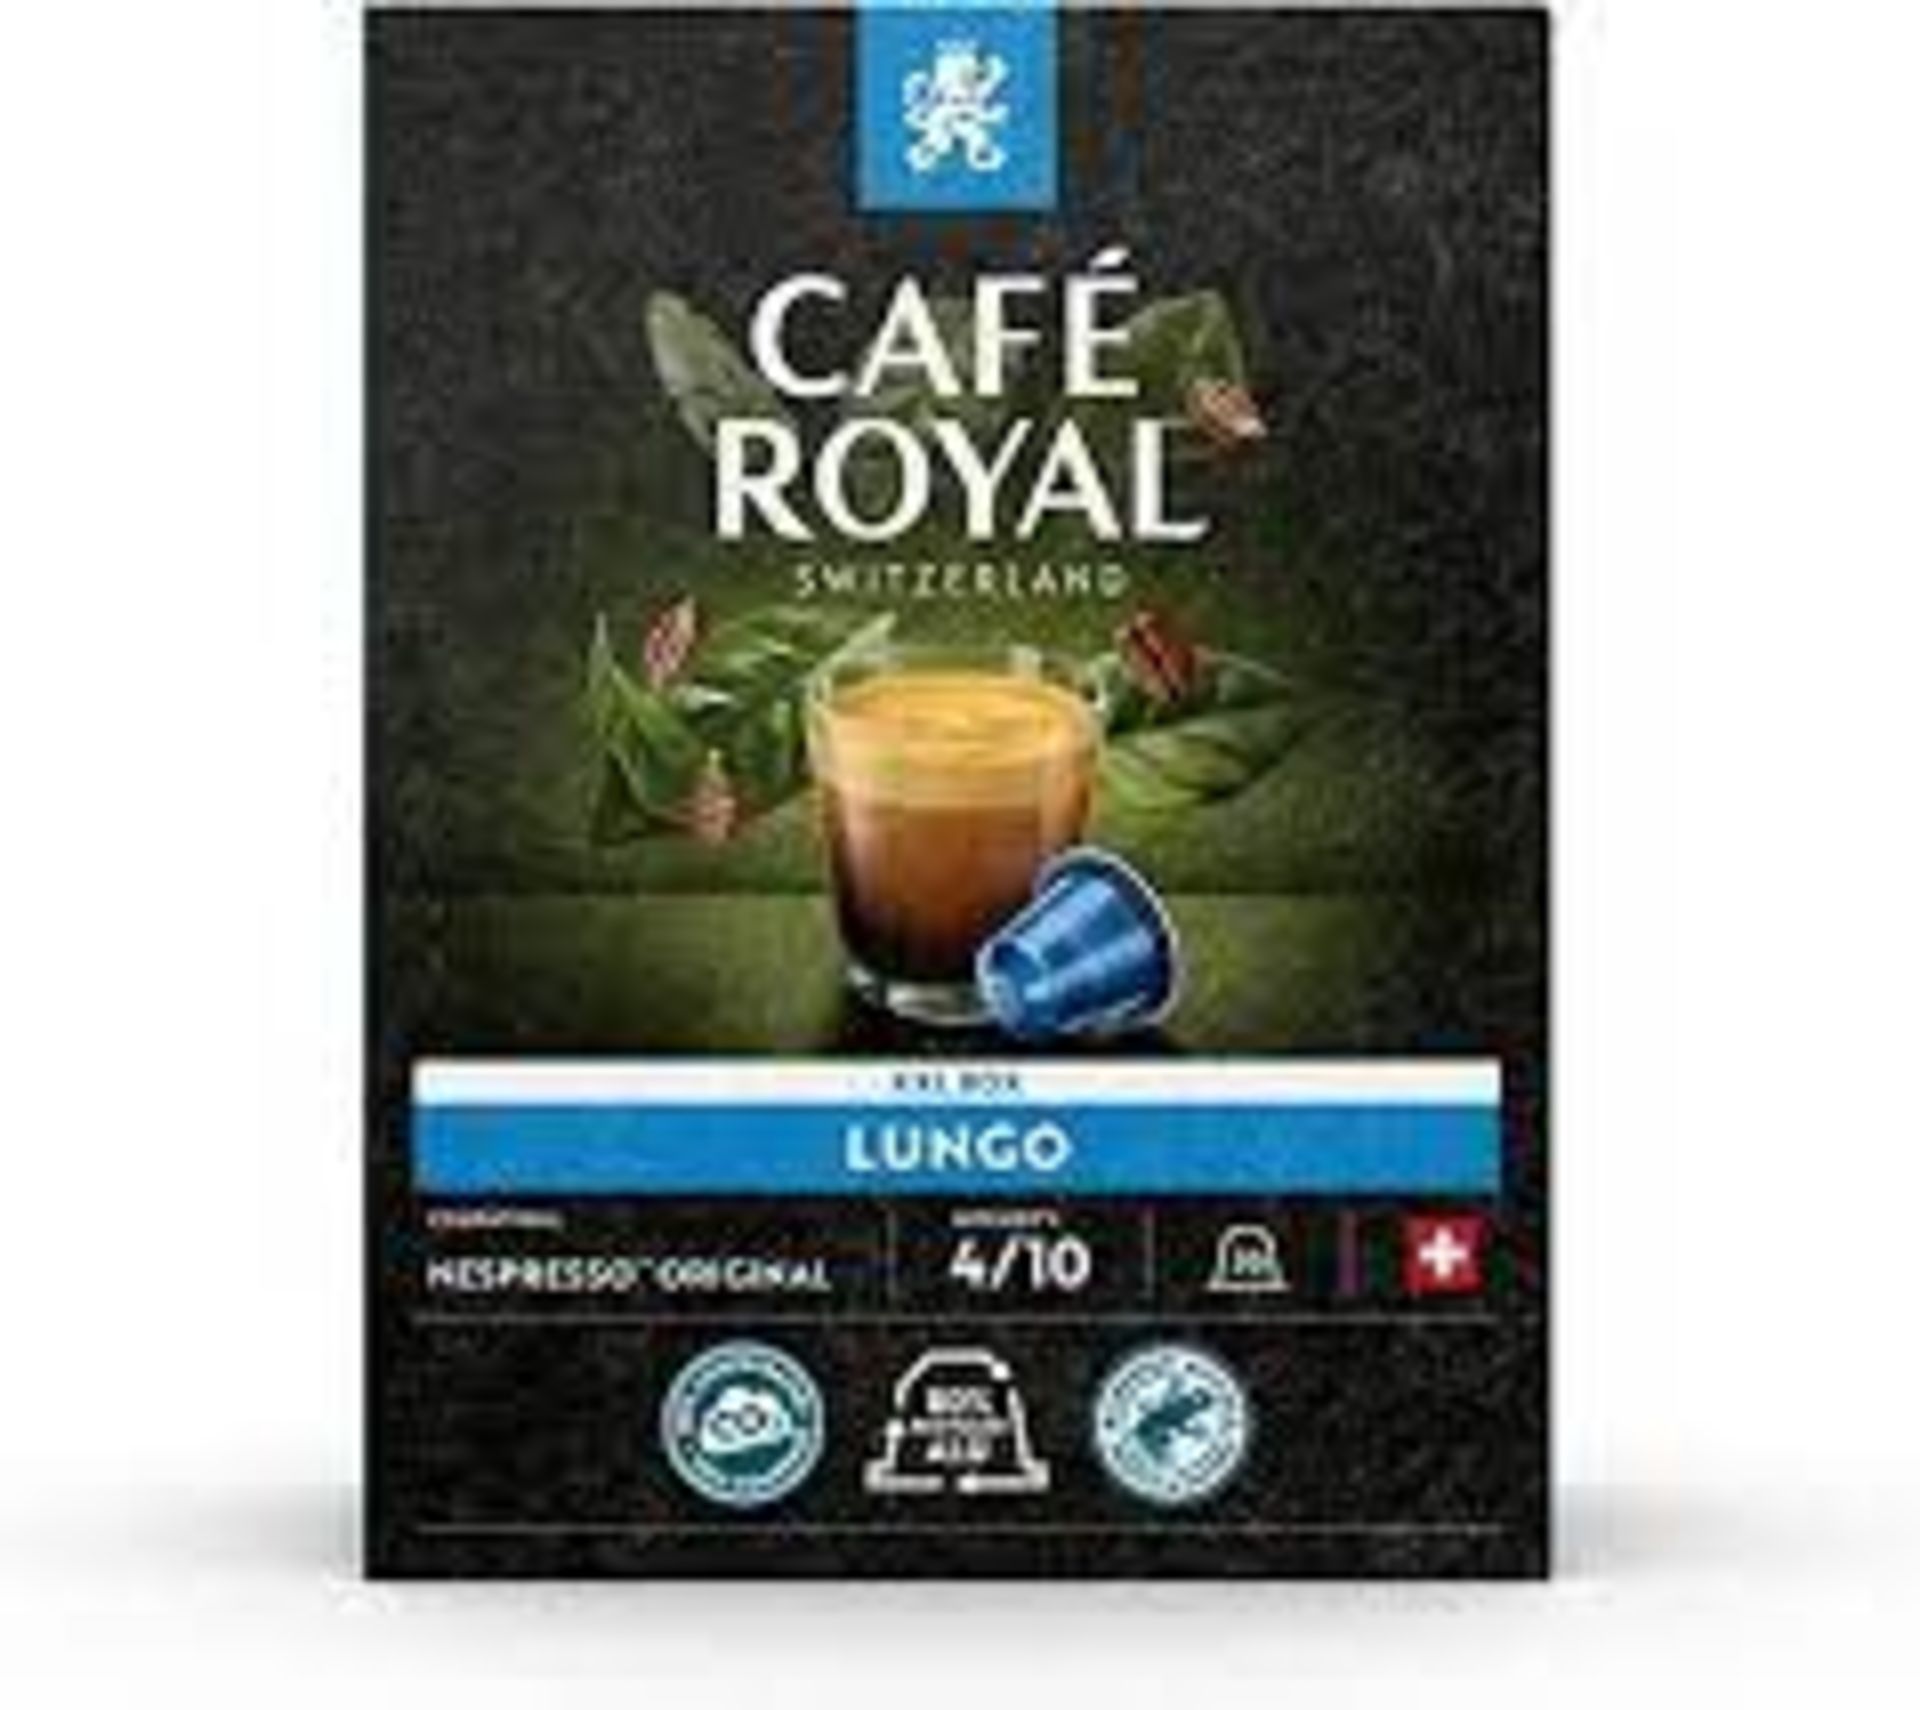 RRP £4185 (Approx. Count 199) spW55T7062o 34 x Cafe Royal Lungo 100 Capsules for Nespresso Coffee